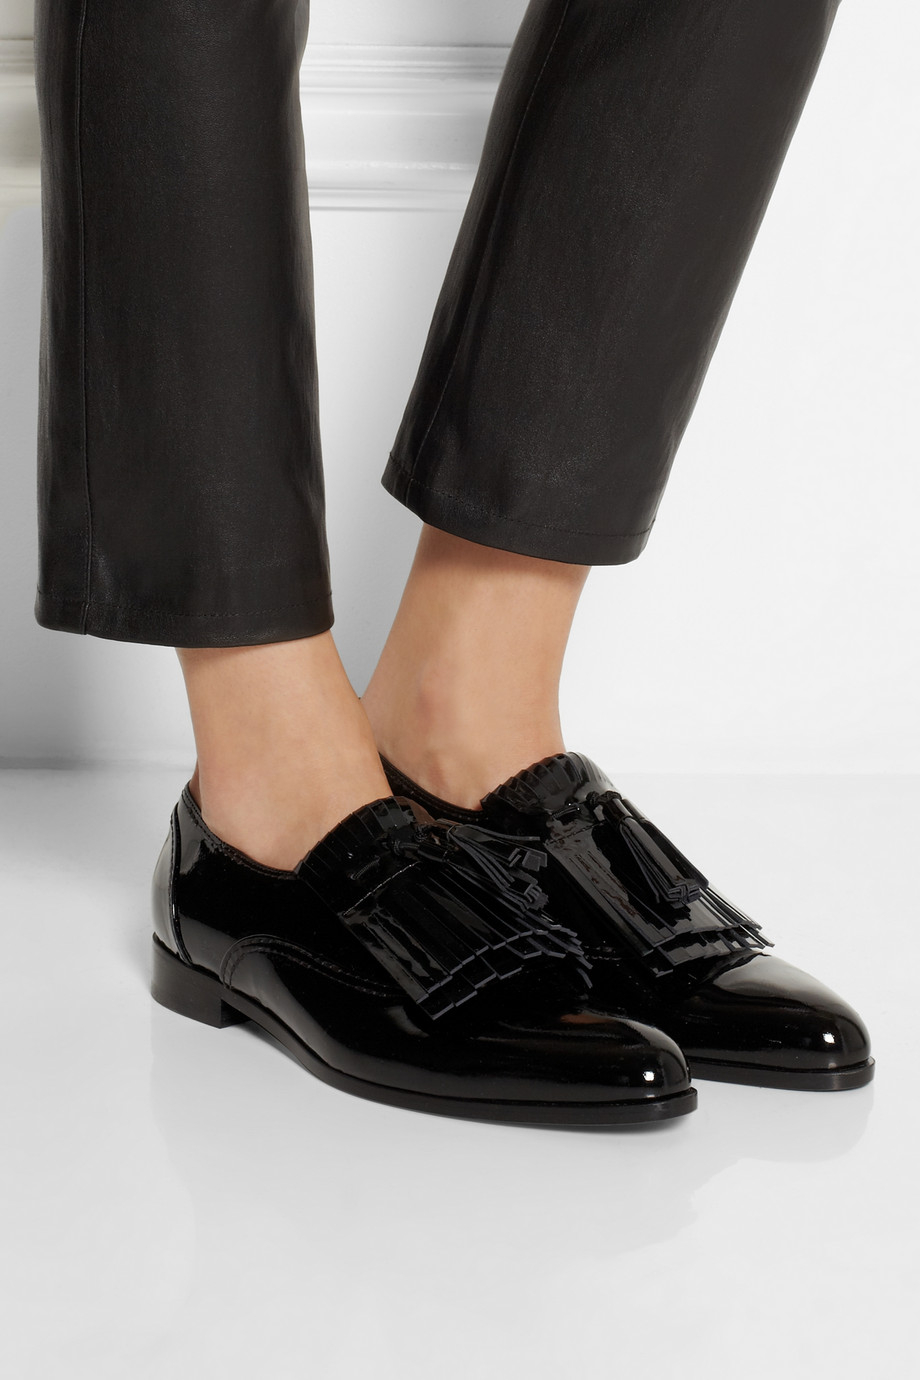 Lanvin Mila Fringed Patentleather Loafers in Black - Lyst